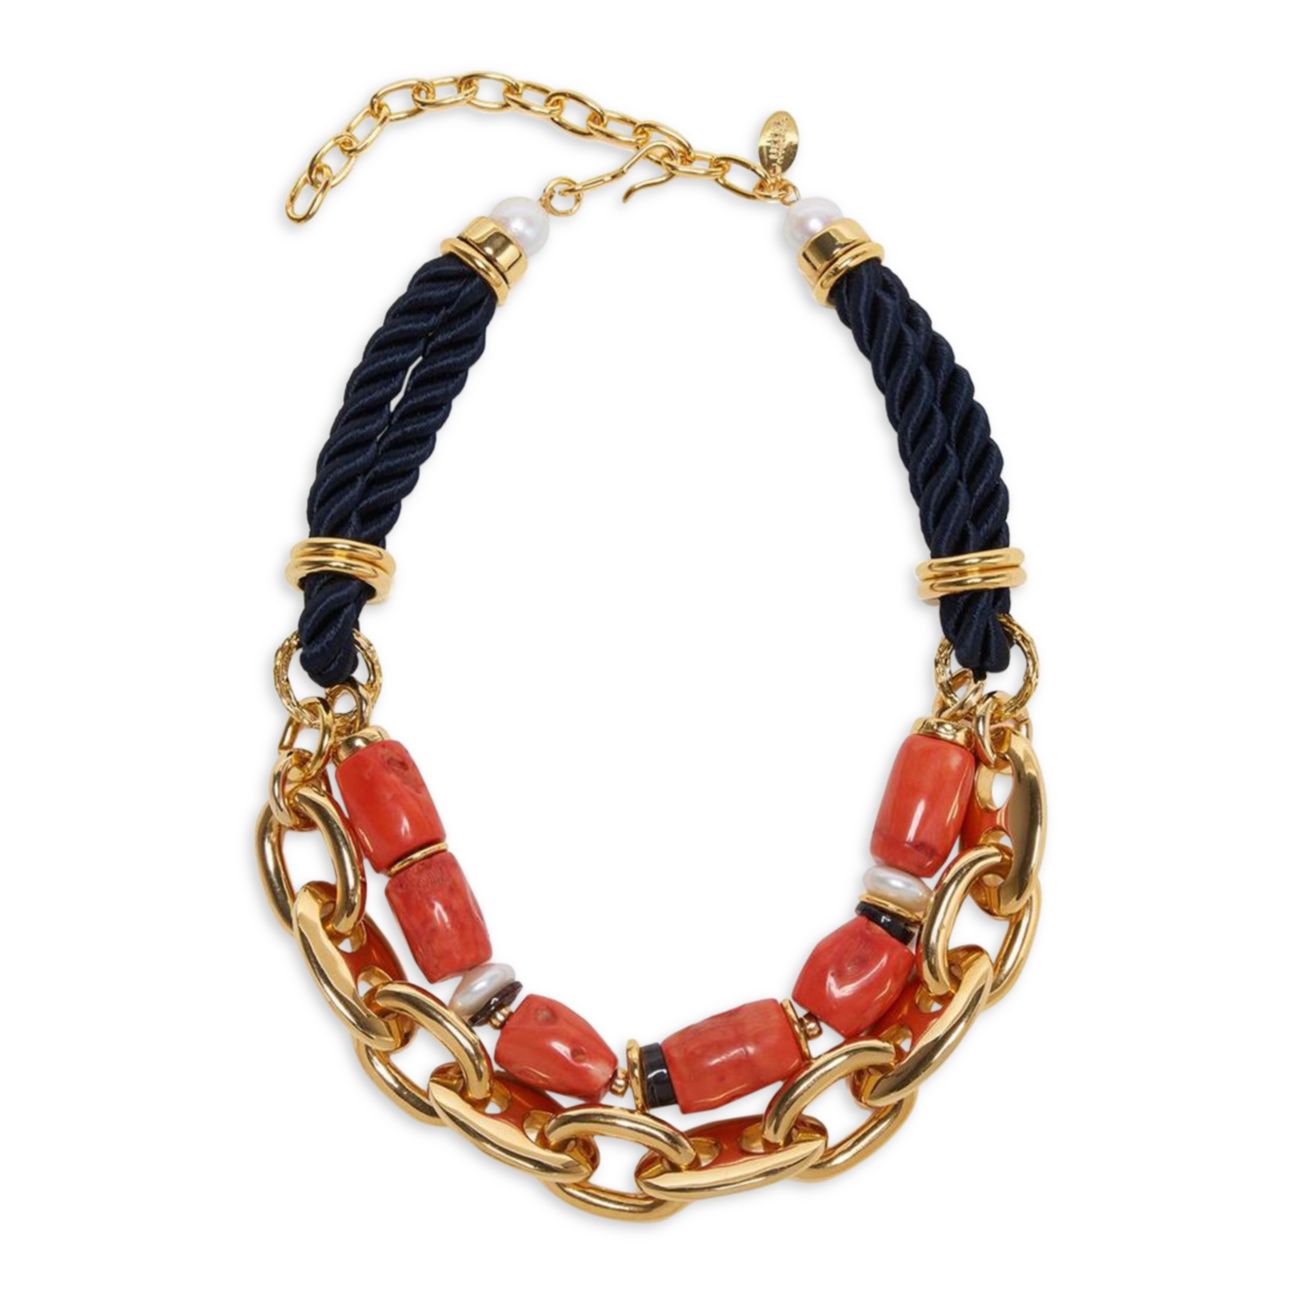 Majorca Goldplated, 12-13MM Freshwater Pearl &amp; Multi-Beaded Collar Necklace Lizzie Fortunato